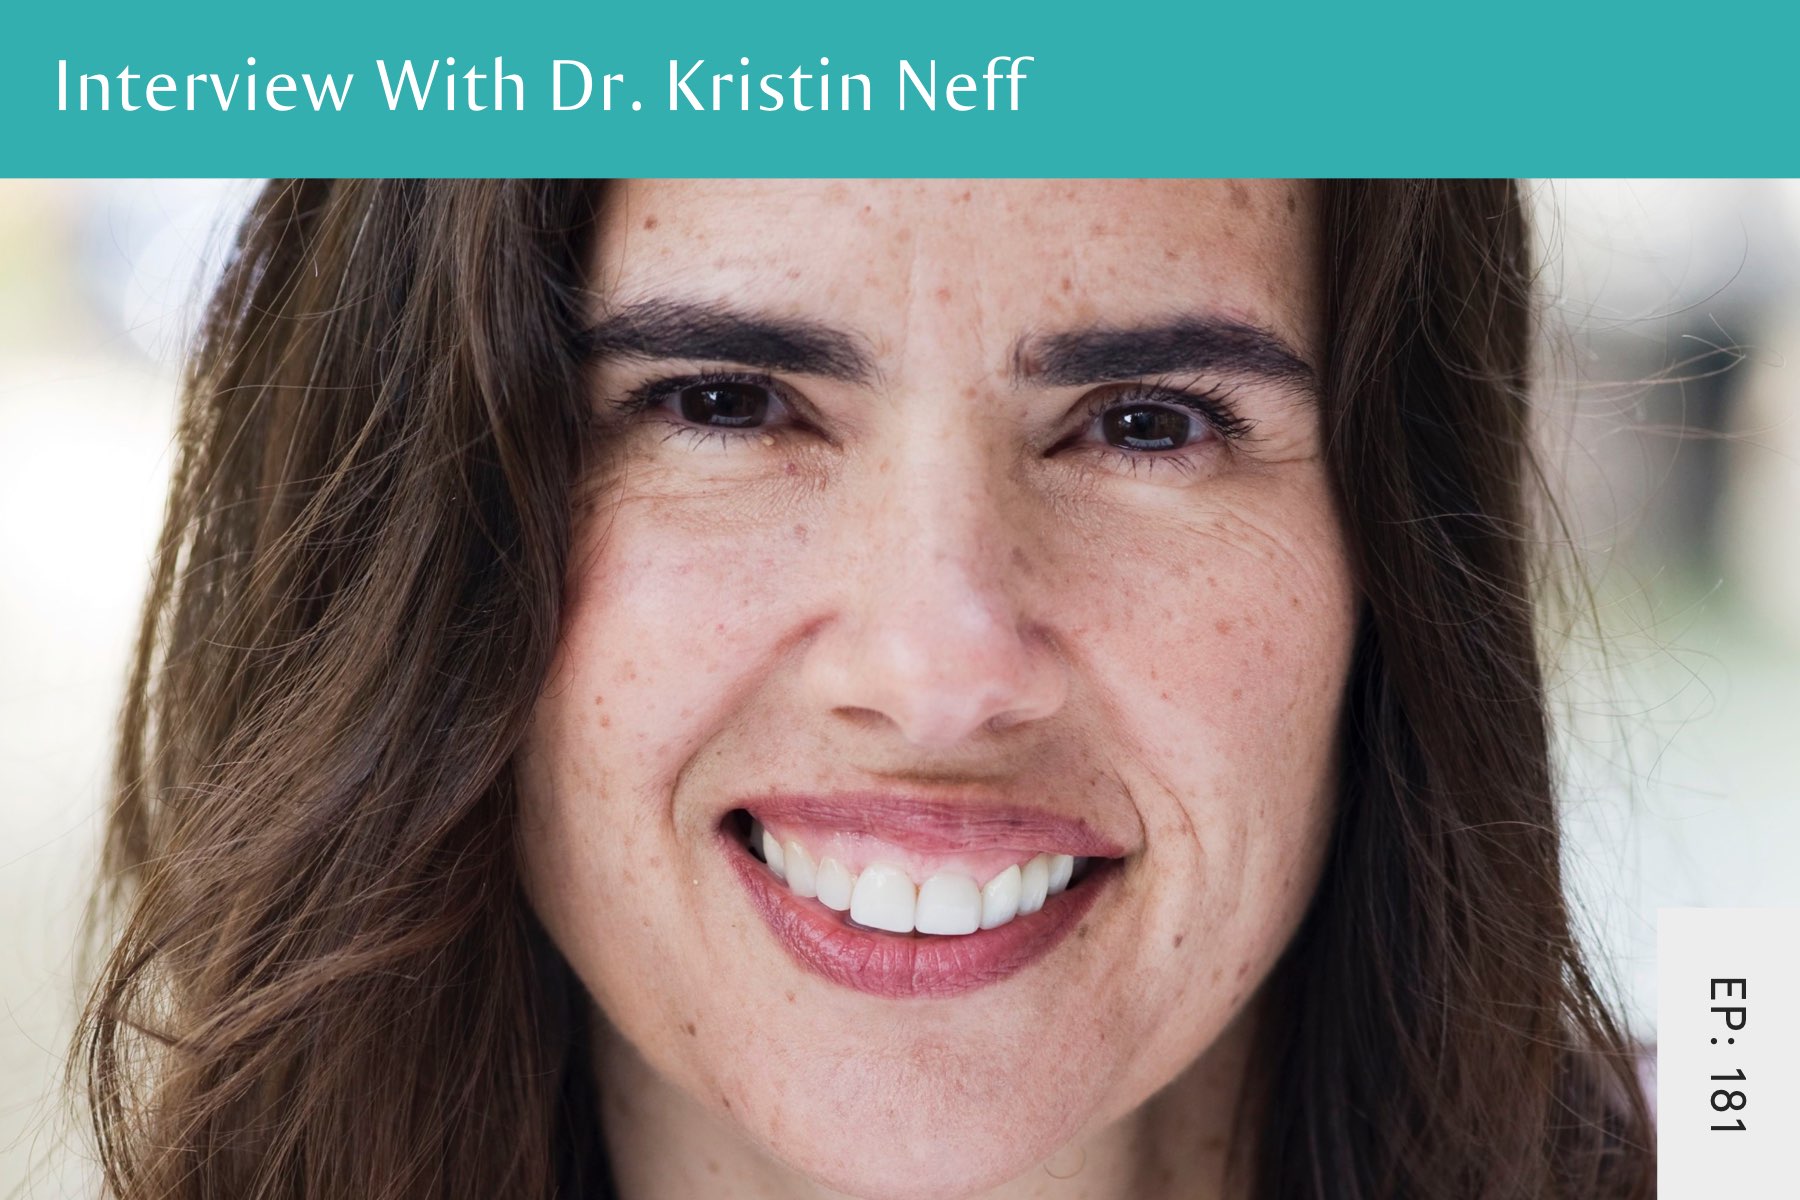 181: The Power of Self-Compassion with Dr. Kristin Neff - Seven Health: Eating Disorder Recovery and Anti Diet Nutritionist